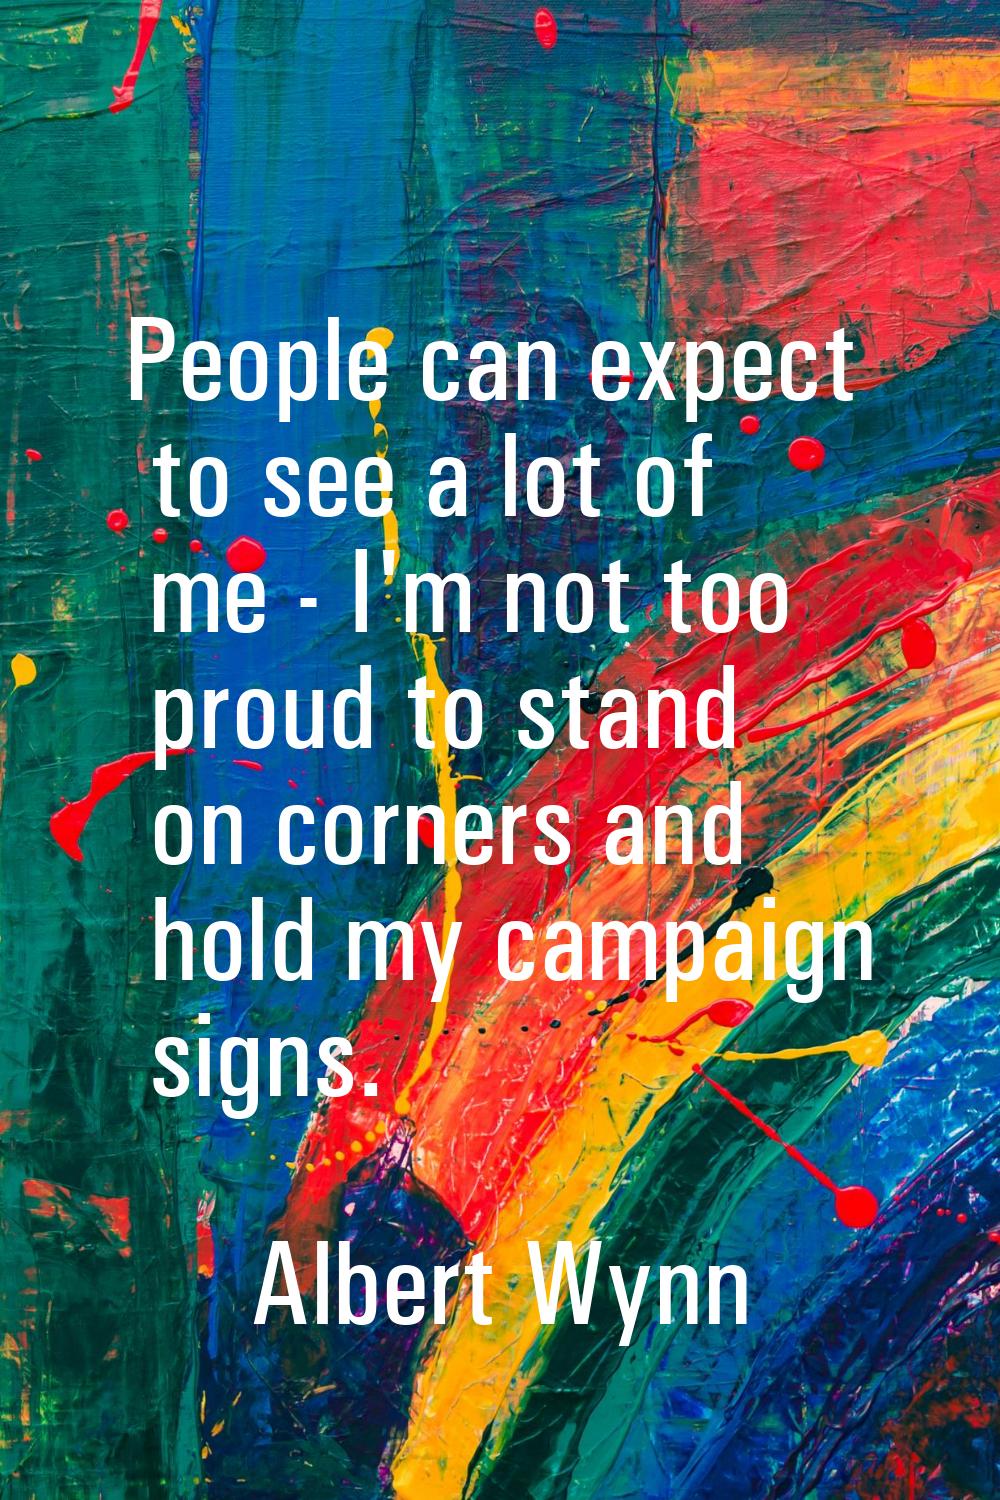 People can expect to see a lot of me - I'm not too proud to stand on corners and hold my campaign s